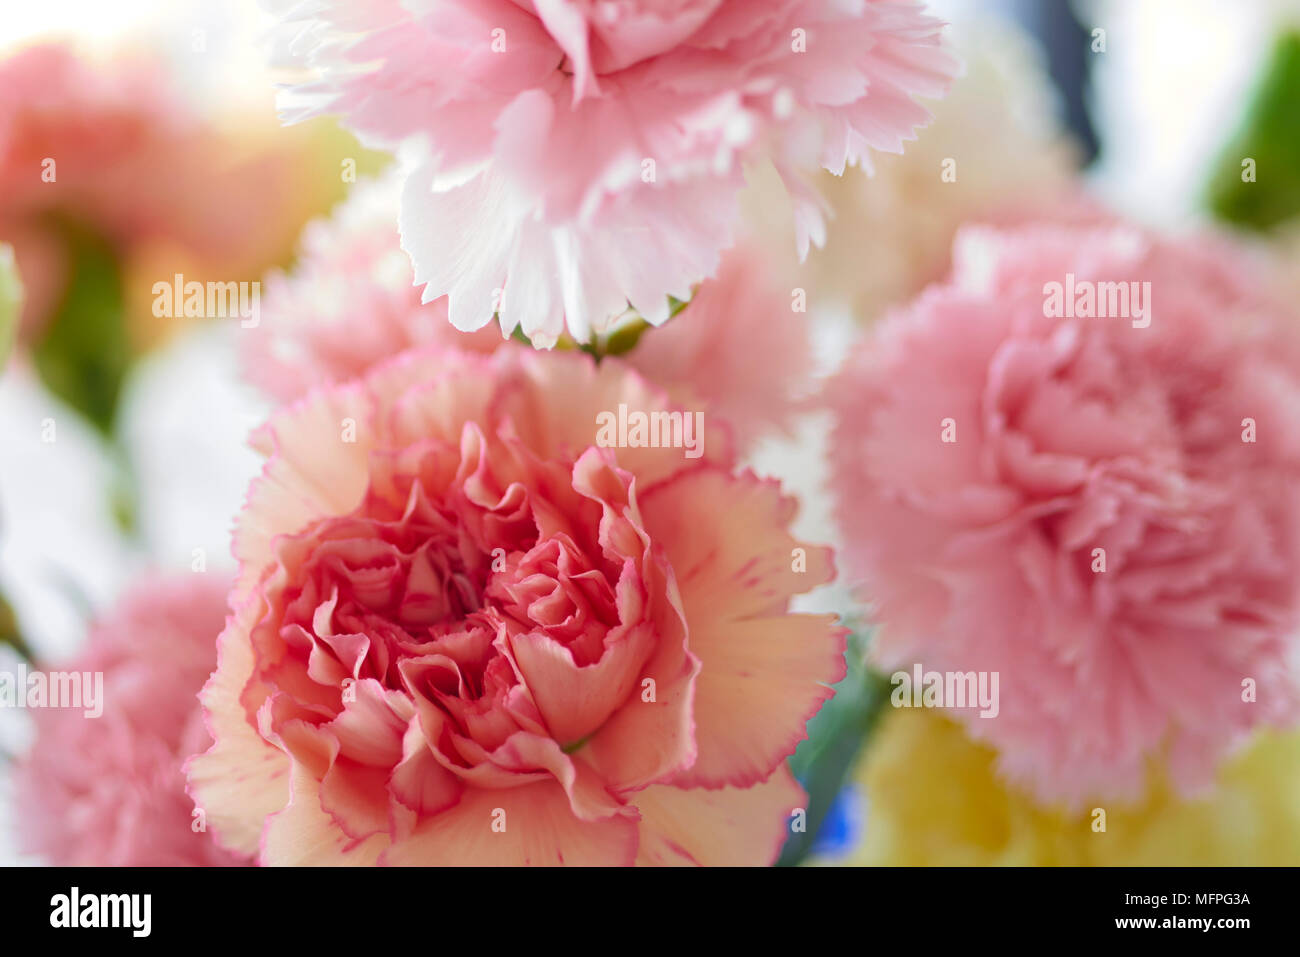 Pink and white carnations Stock Photo